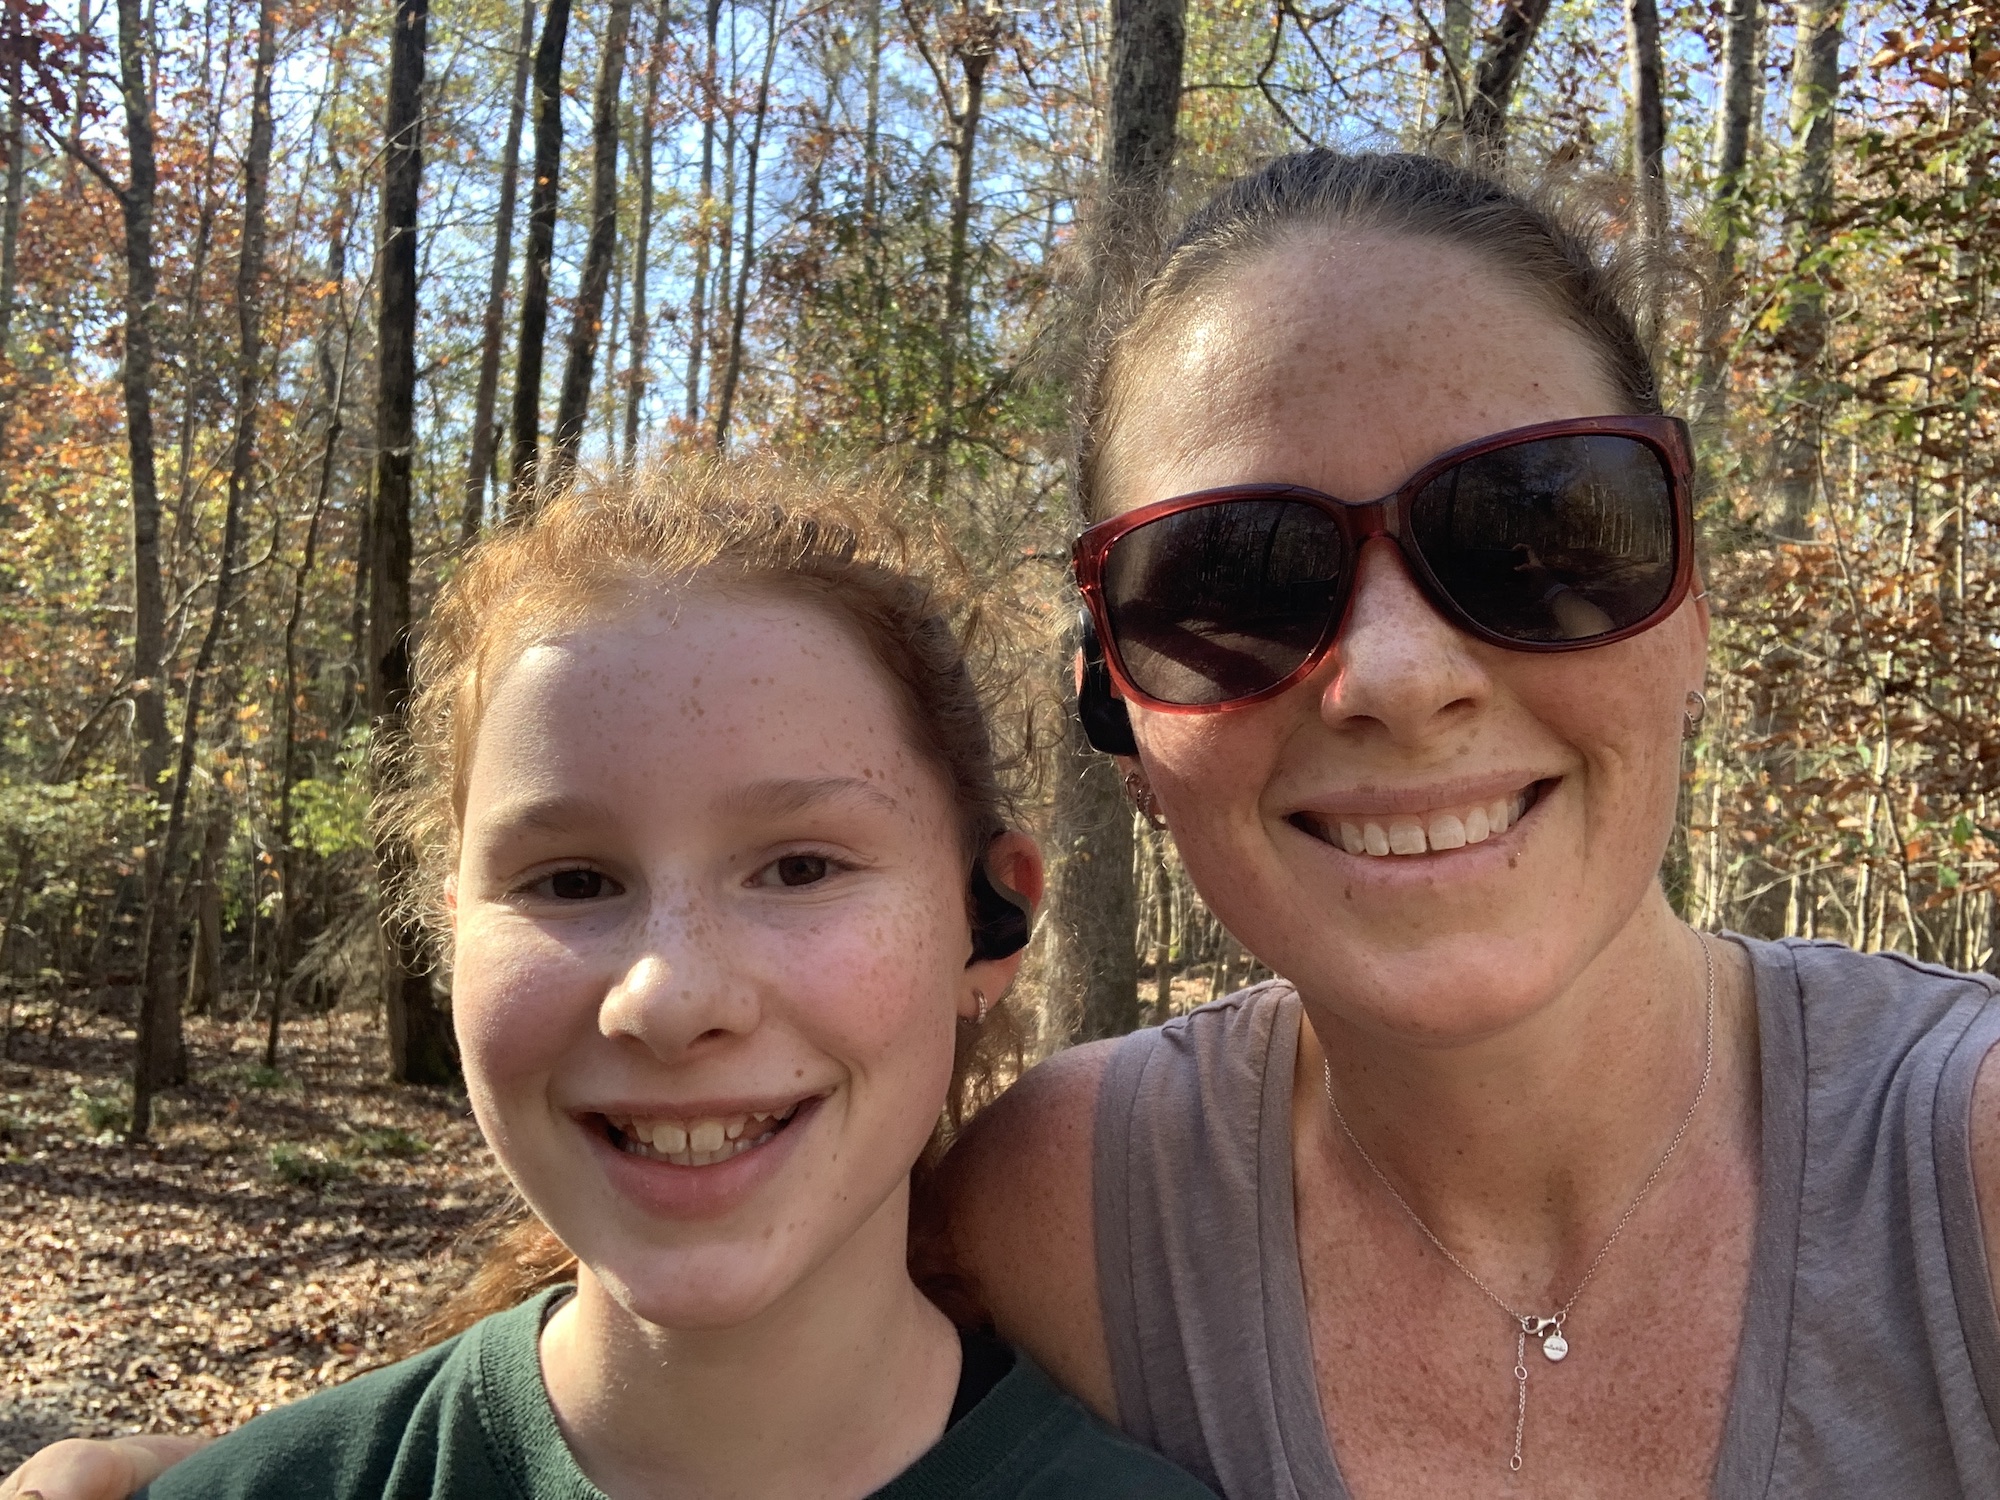 Mommy and me monday- n and me 3.5 mile run